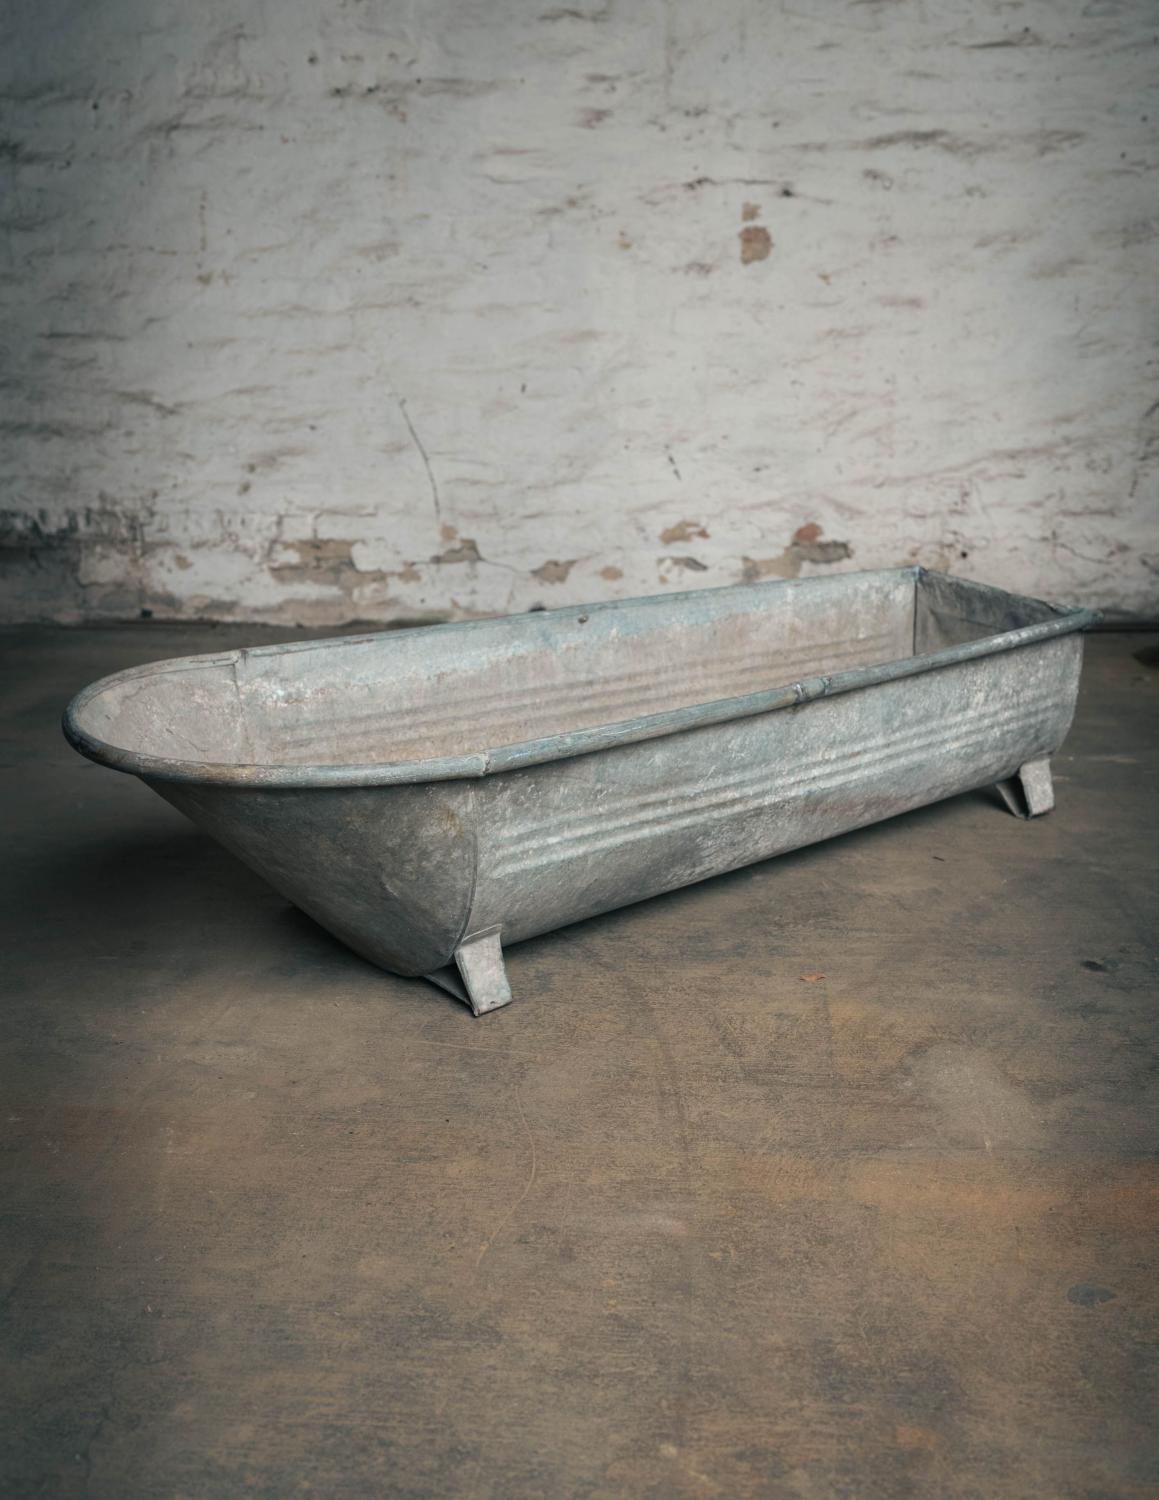 Vintage zinc bathtub from the 1940s